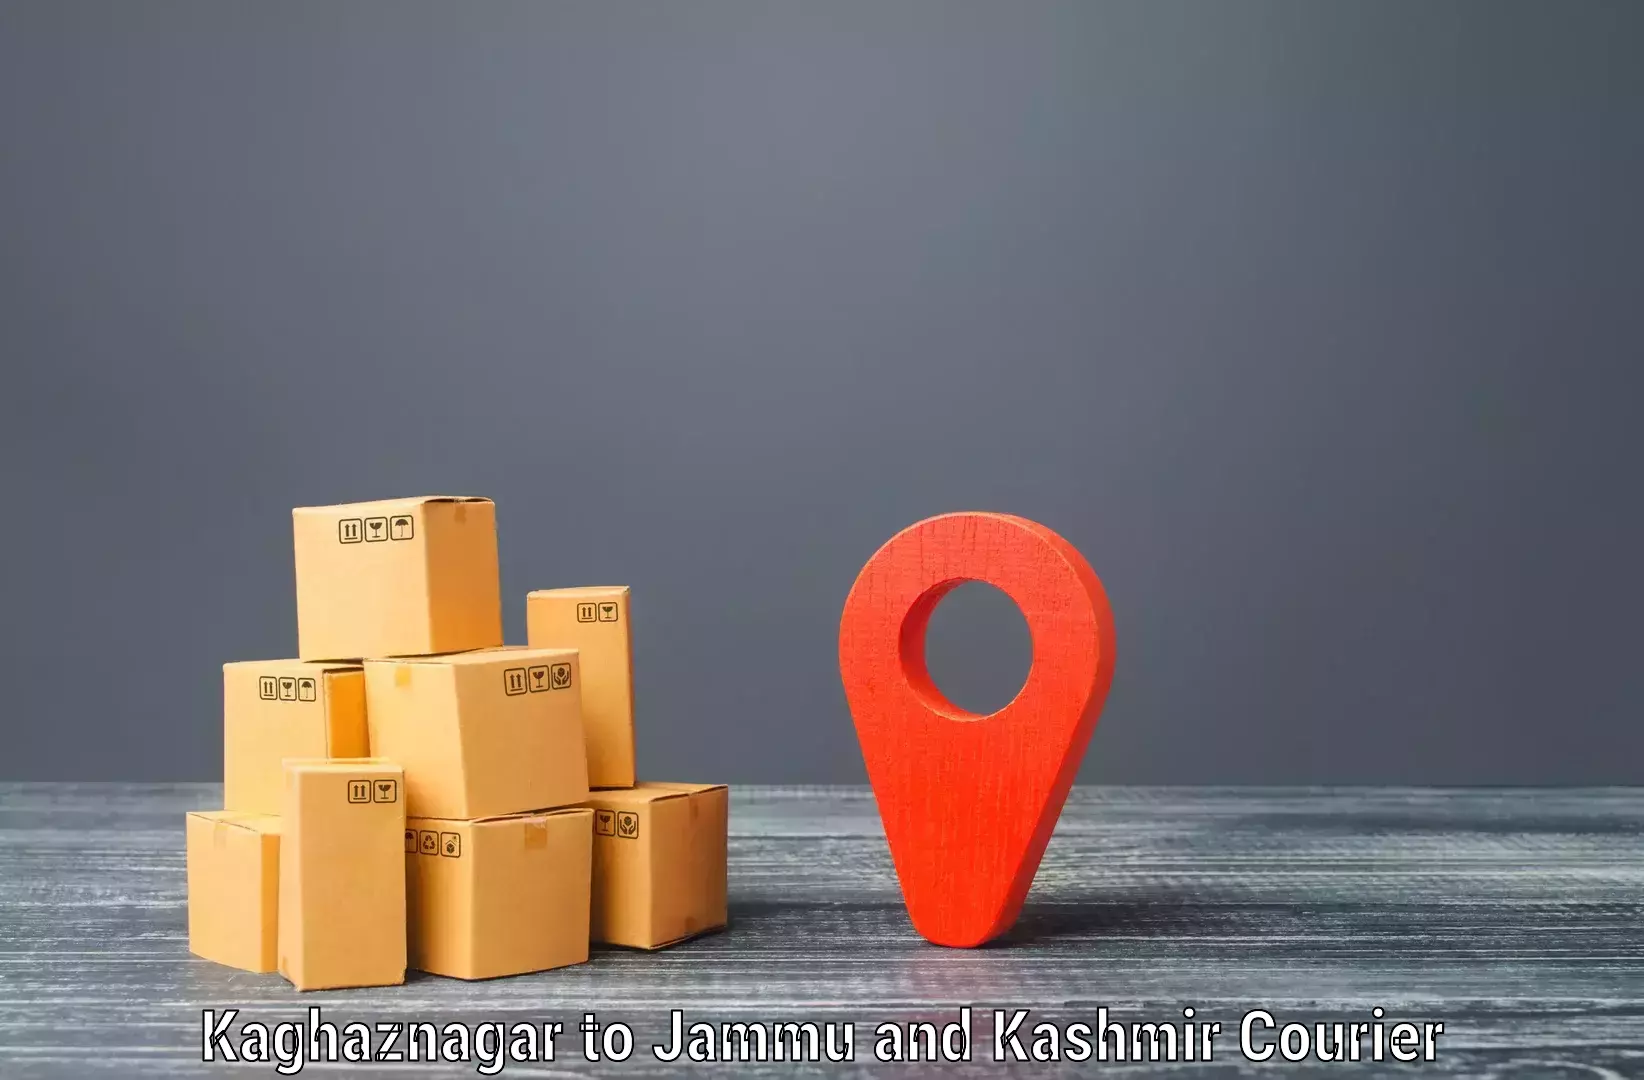 Tailored shipping plans in Kaghaznagar to Pulwama